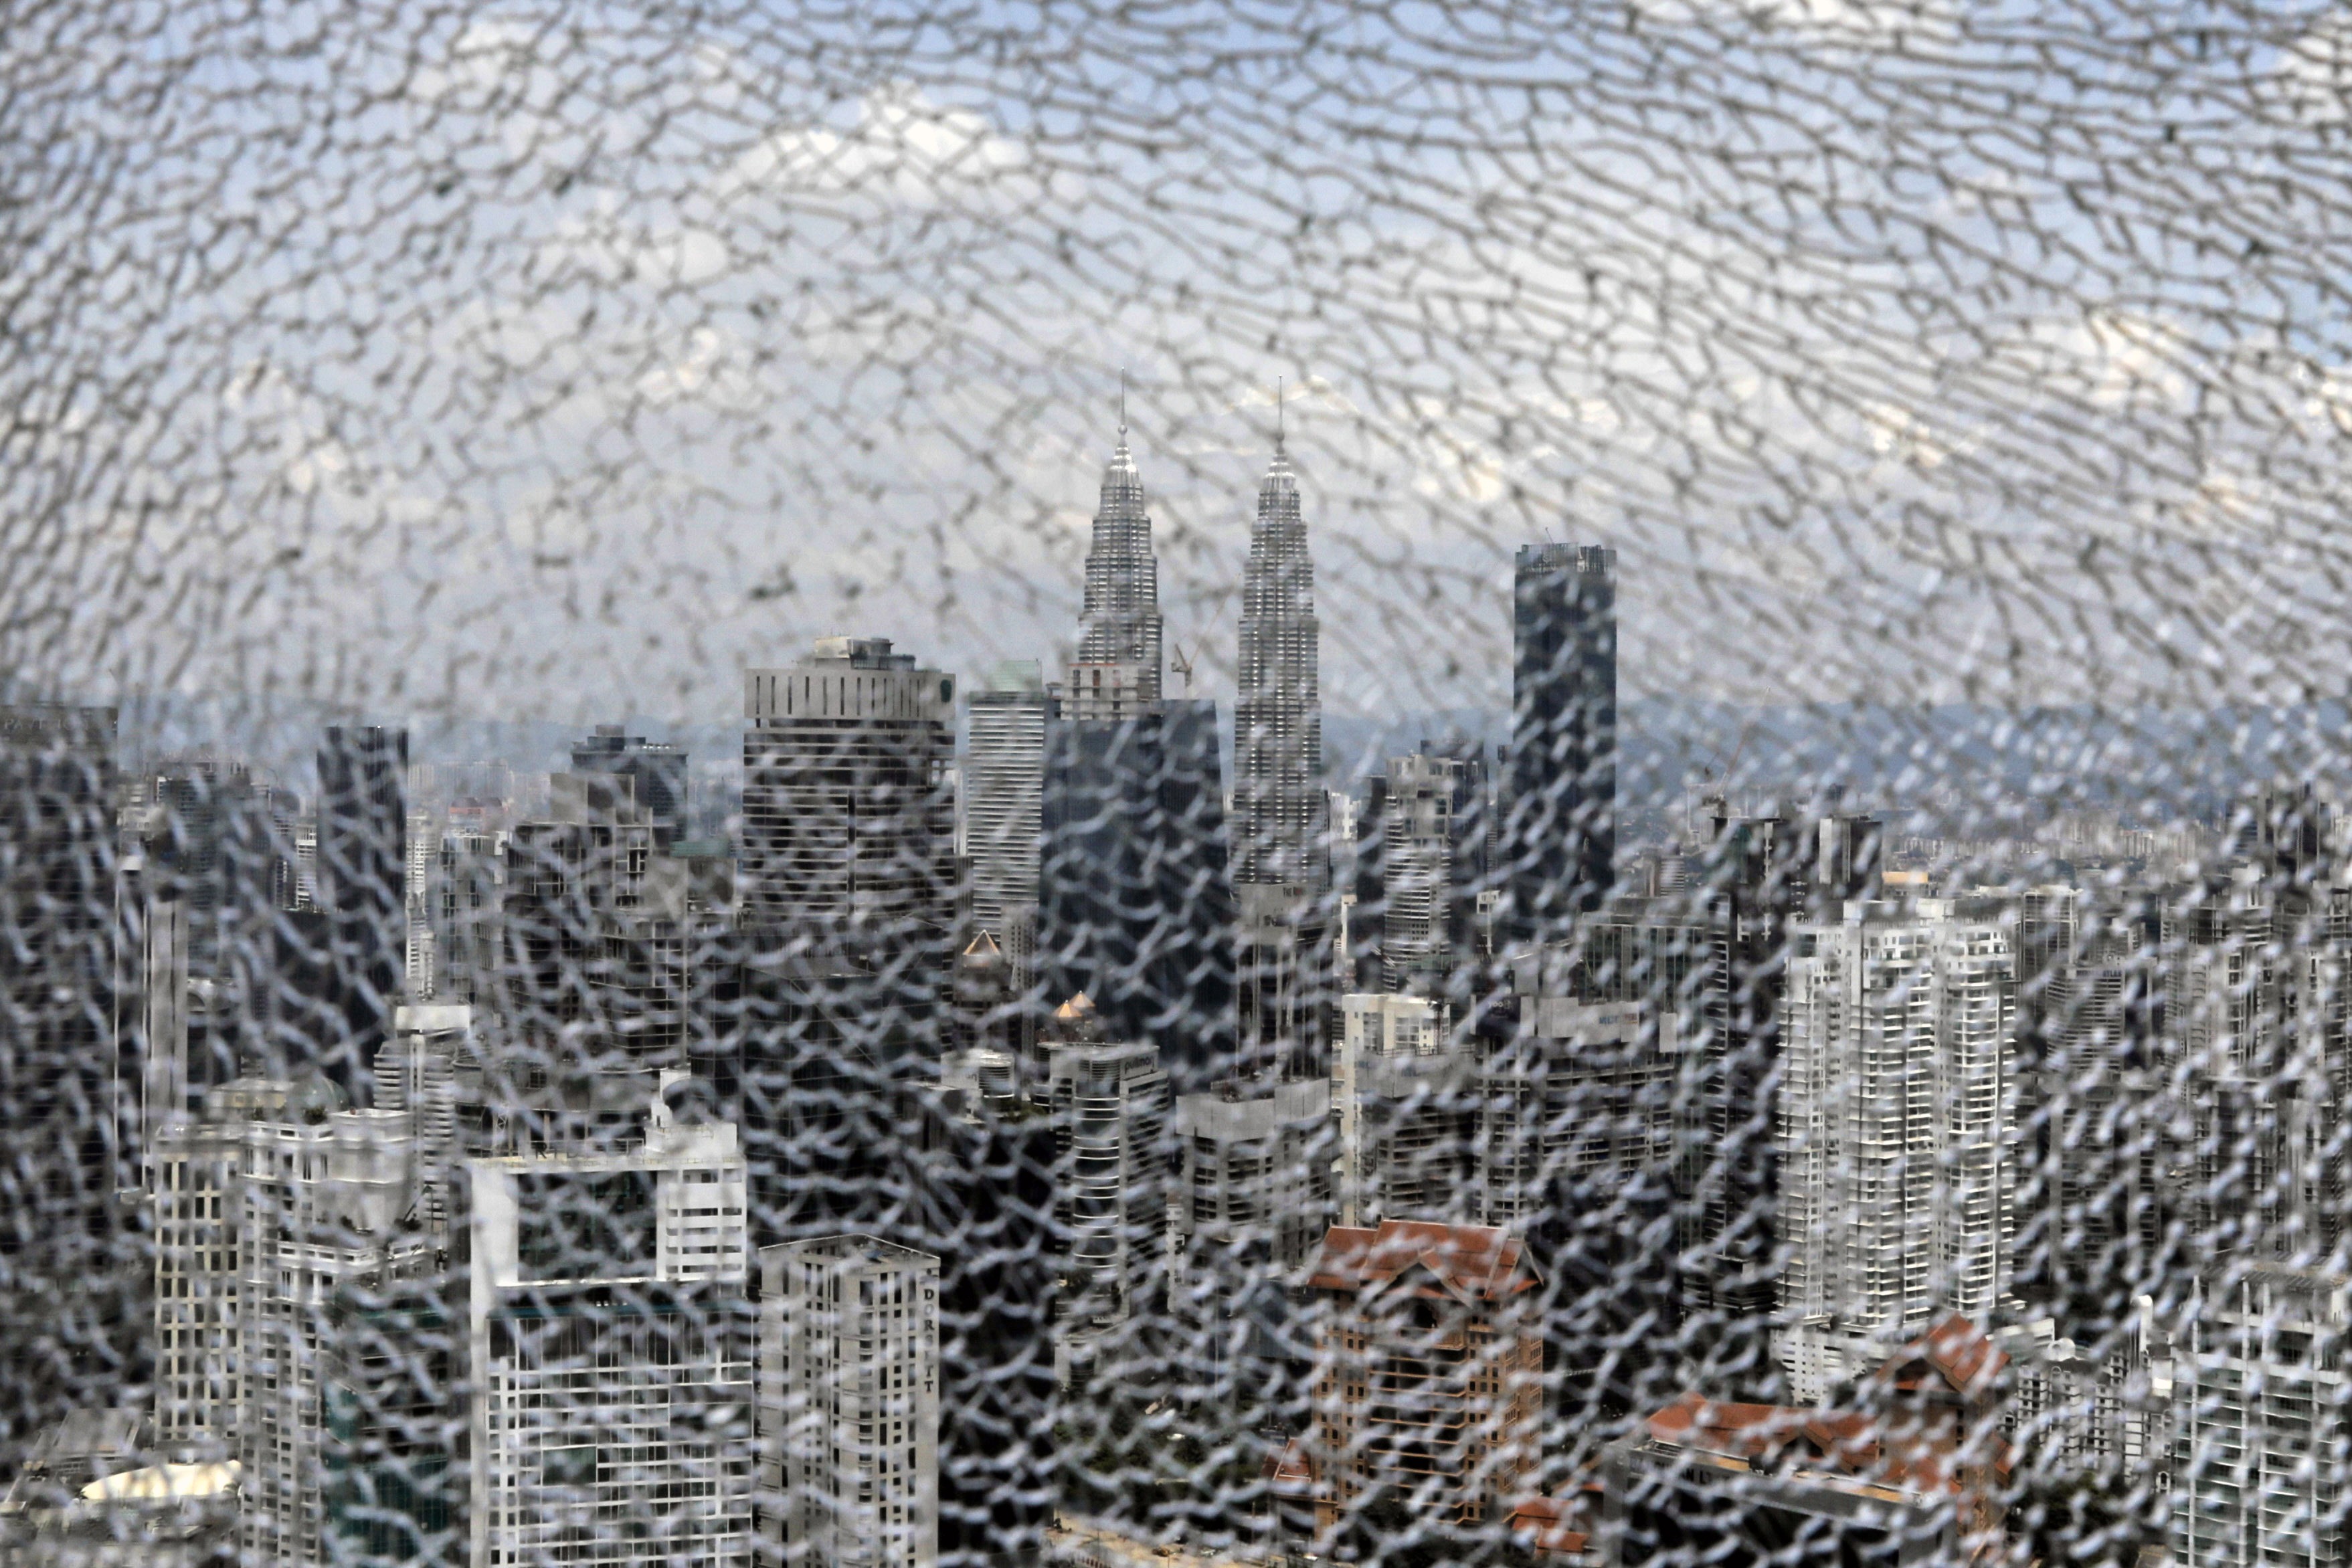 The Petronas Twin Towers are seen in the distance through a shattered glass pane inside The Exchange 106 tower at the Tun Razak Exchange financial district in Kuala Lumpur, Malaysia, on October 23. Malaysia’s latest budget offers manufacturers incentives to relocate their plants to the country. Photographer: Bloomberg